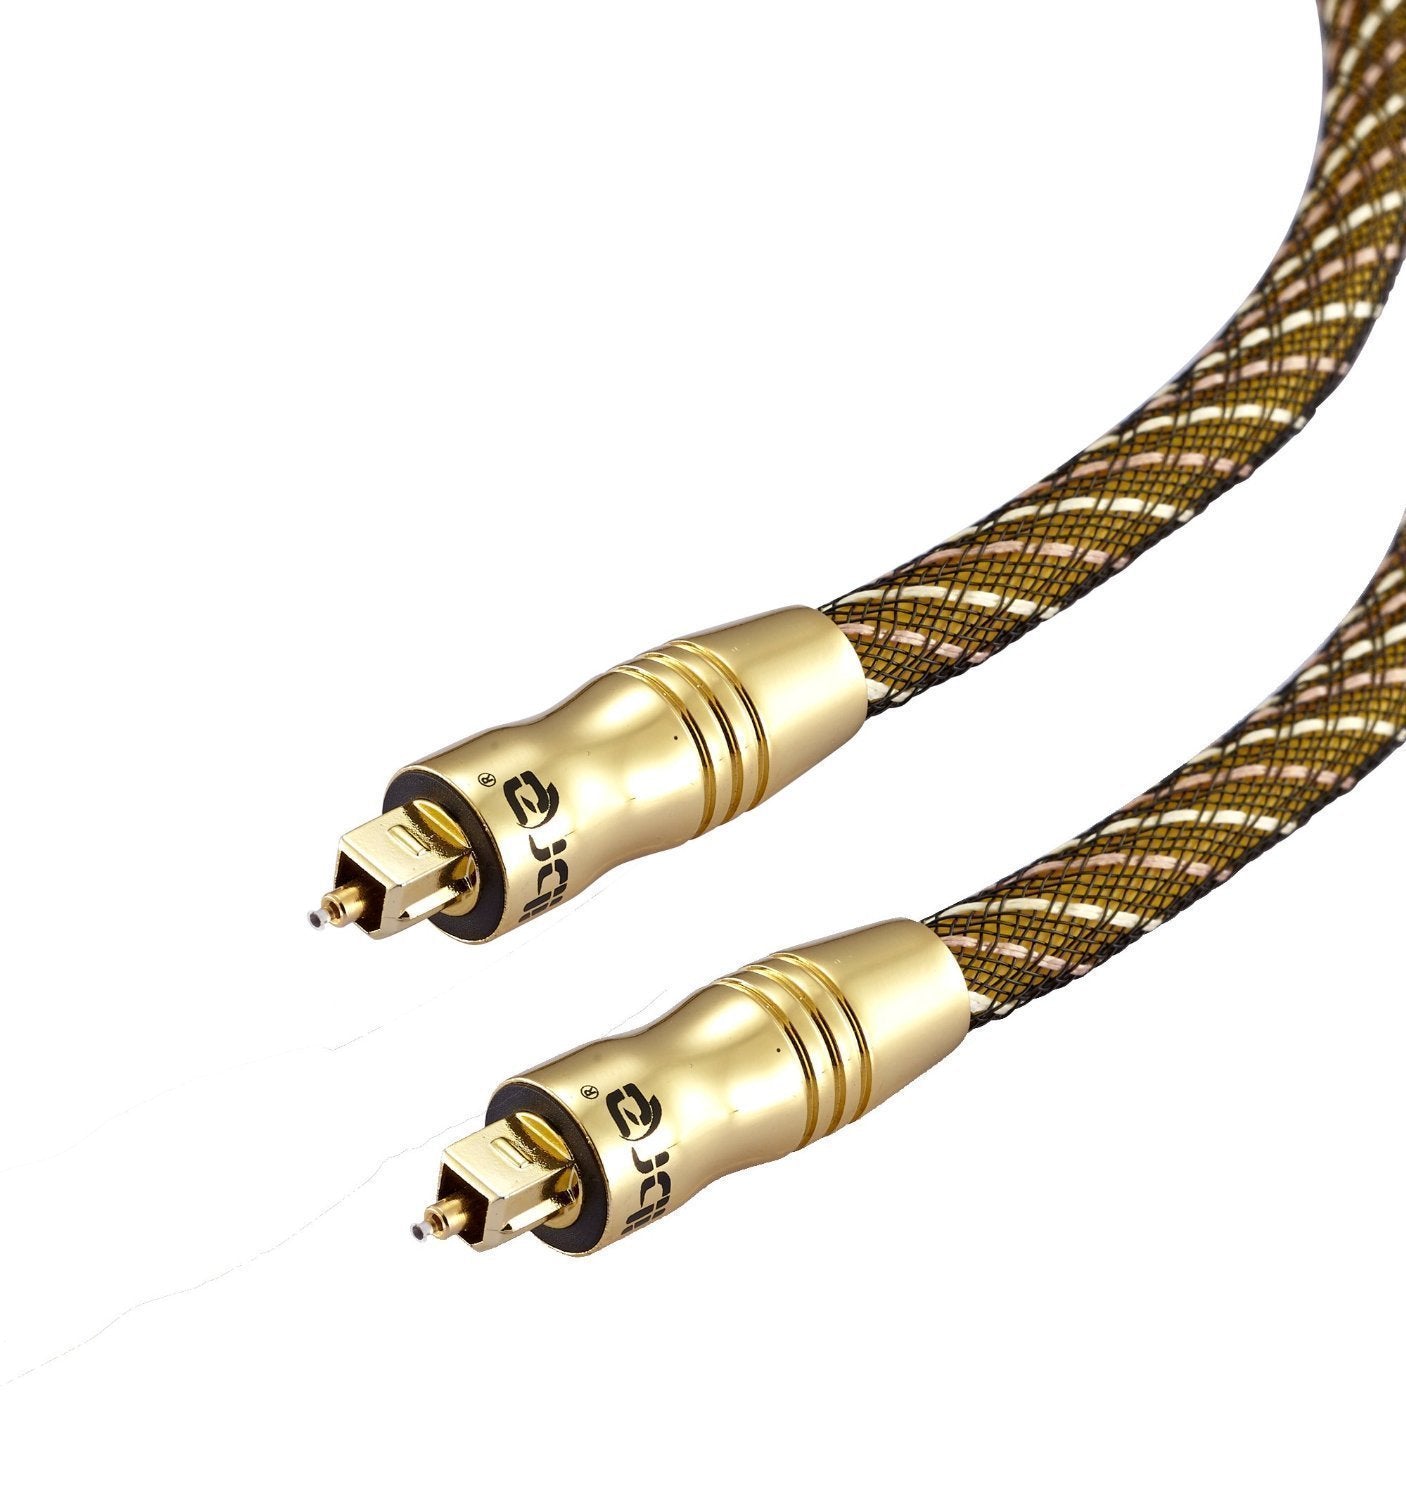 IBRA 1.5M Master Gold Optical TOSLINK Digital Audio Cable - Suitable for PS3, Sky, Sky HD, LCD, LED, Plasma, Blu-ray, Home Cinema Systems, AV Amps